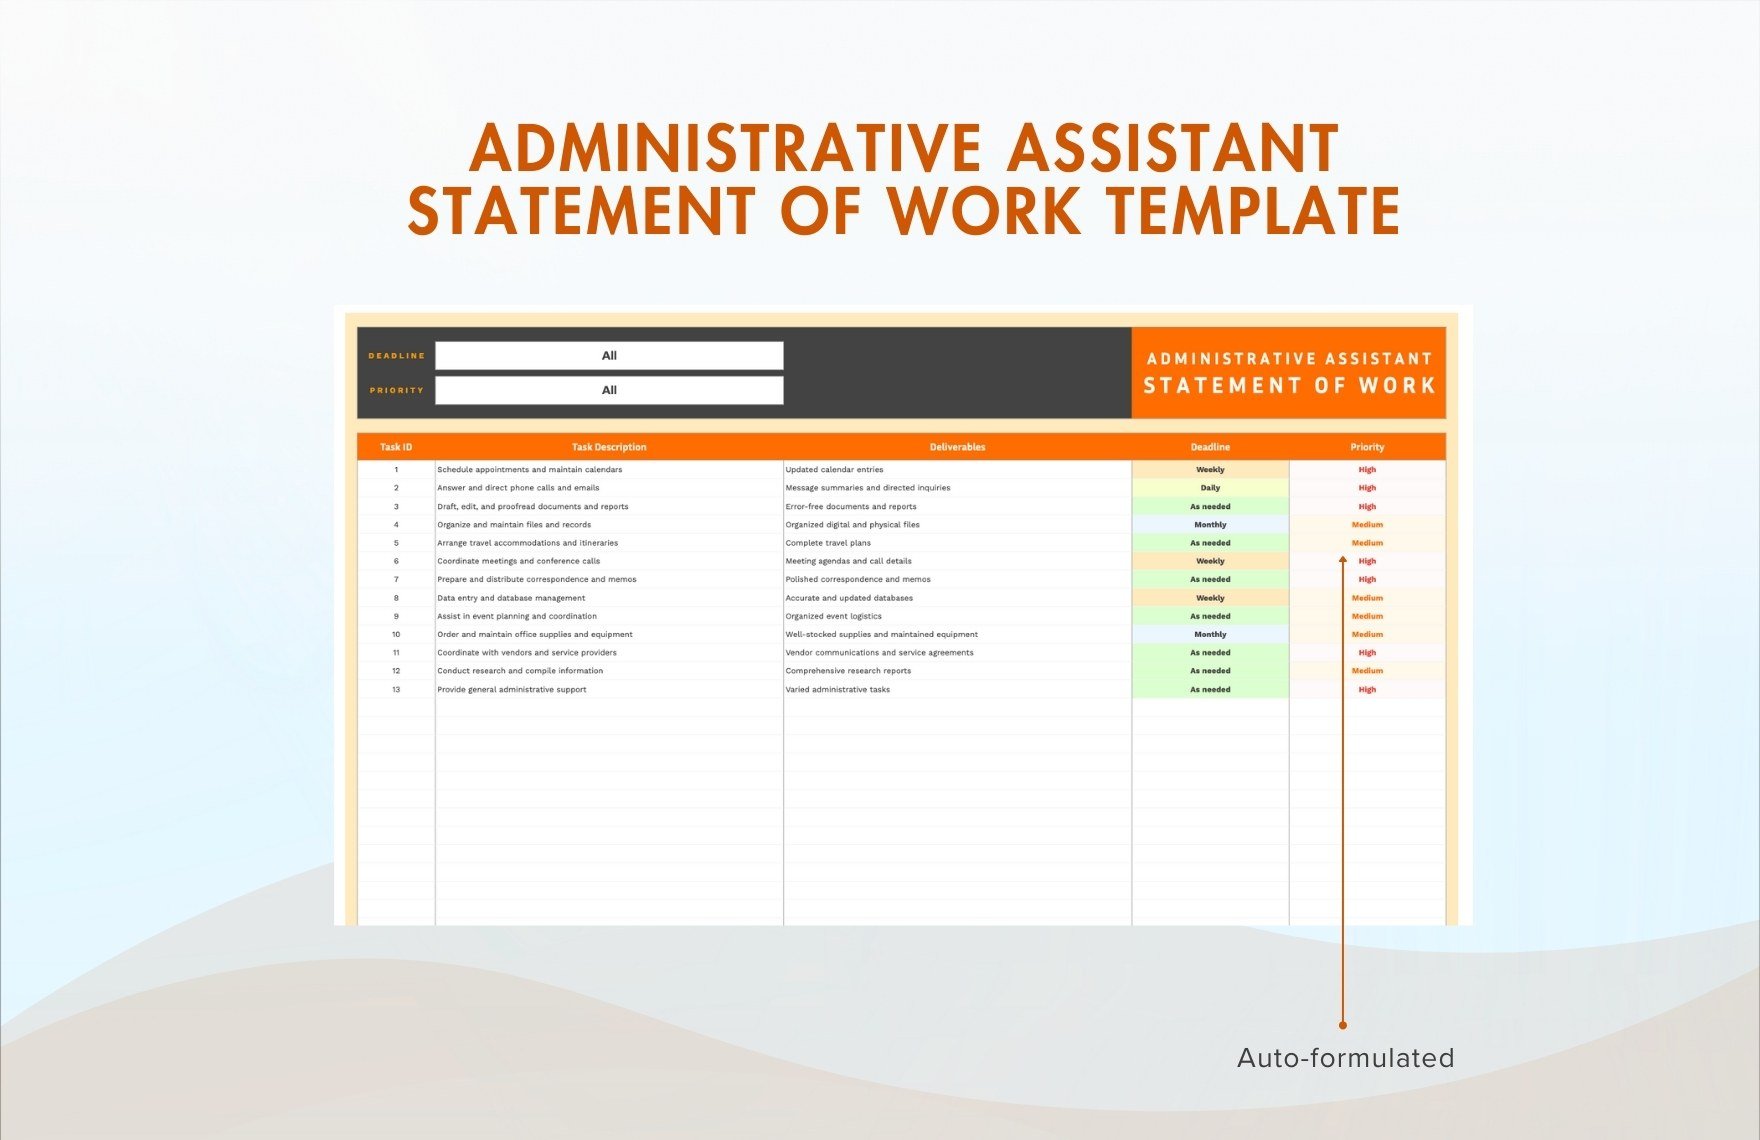 Administrative Assistant Statement of Work Template